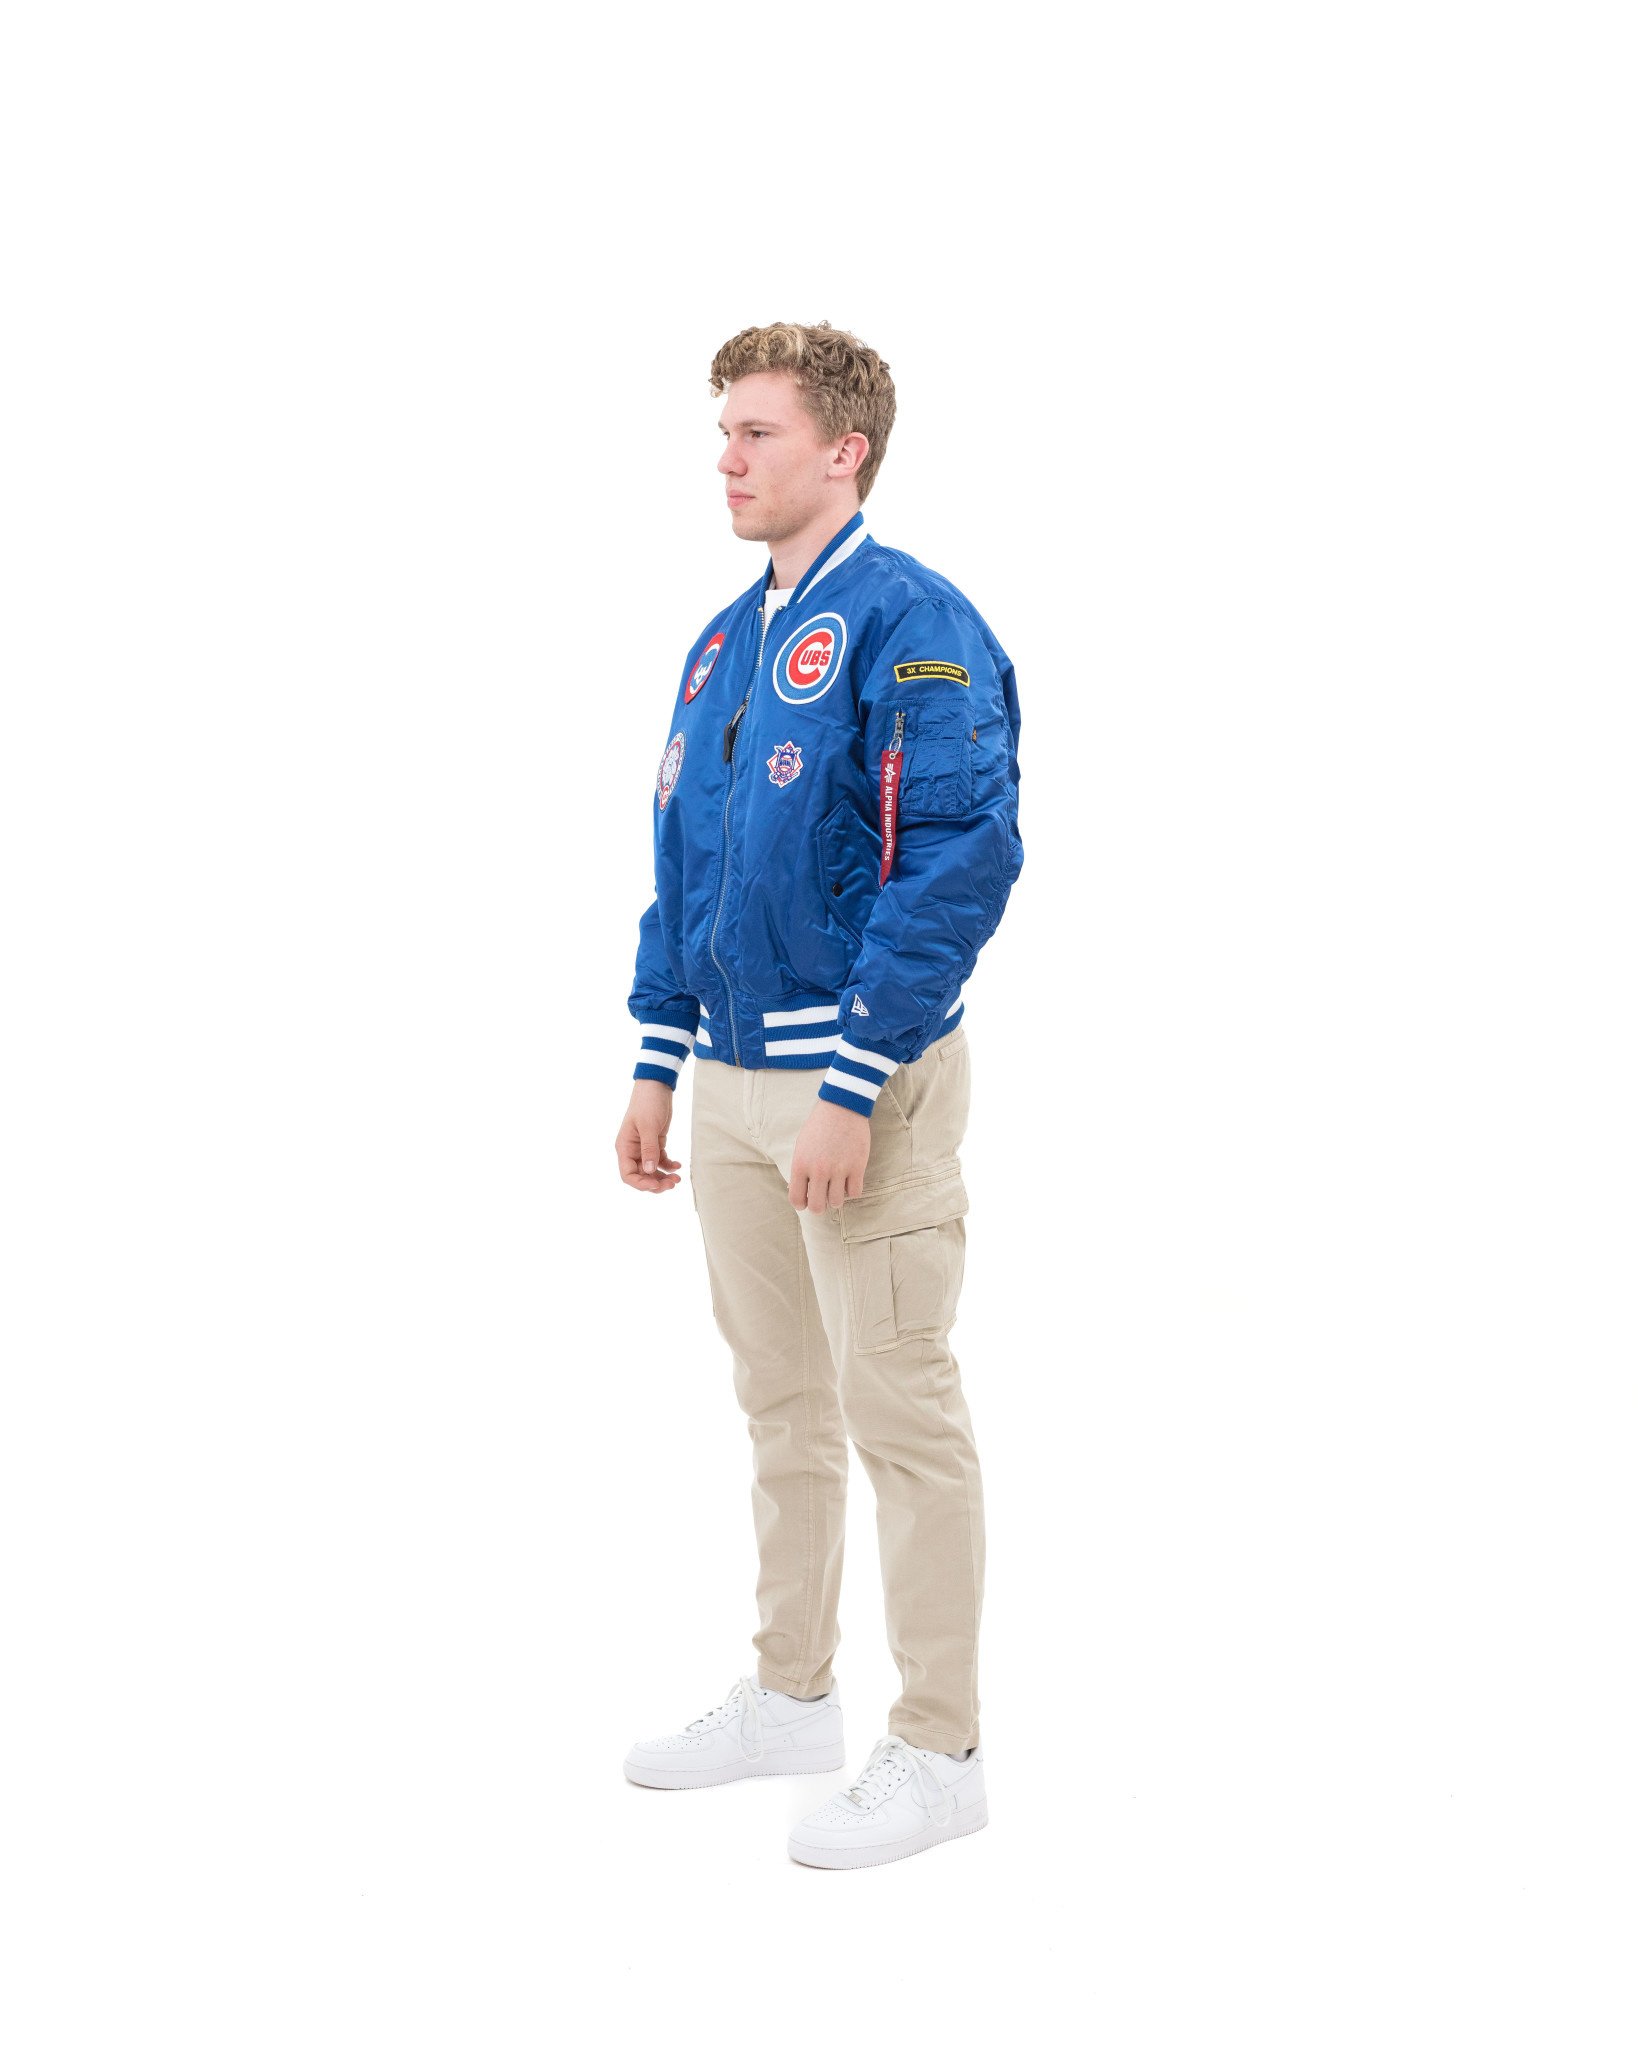 ALPHA INDUSTRIES x CHICAGO CUBS Shop this one of a kind bomber jacket along  with the rest of the collection. Available online now! Link in…